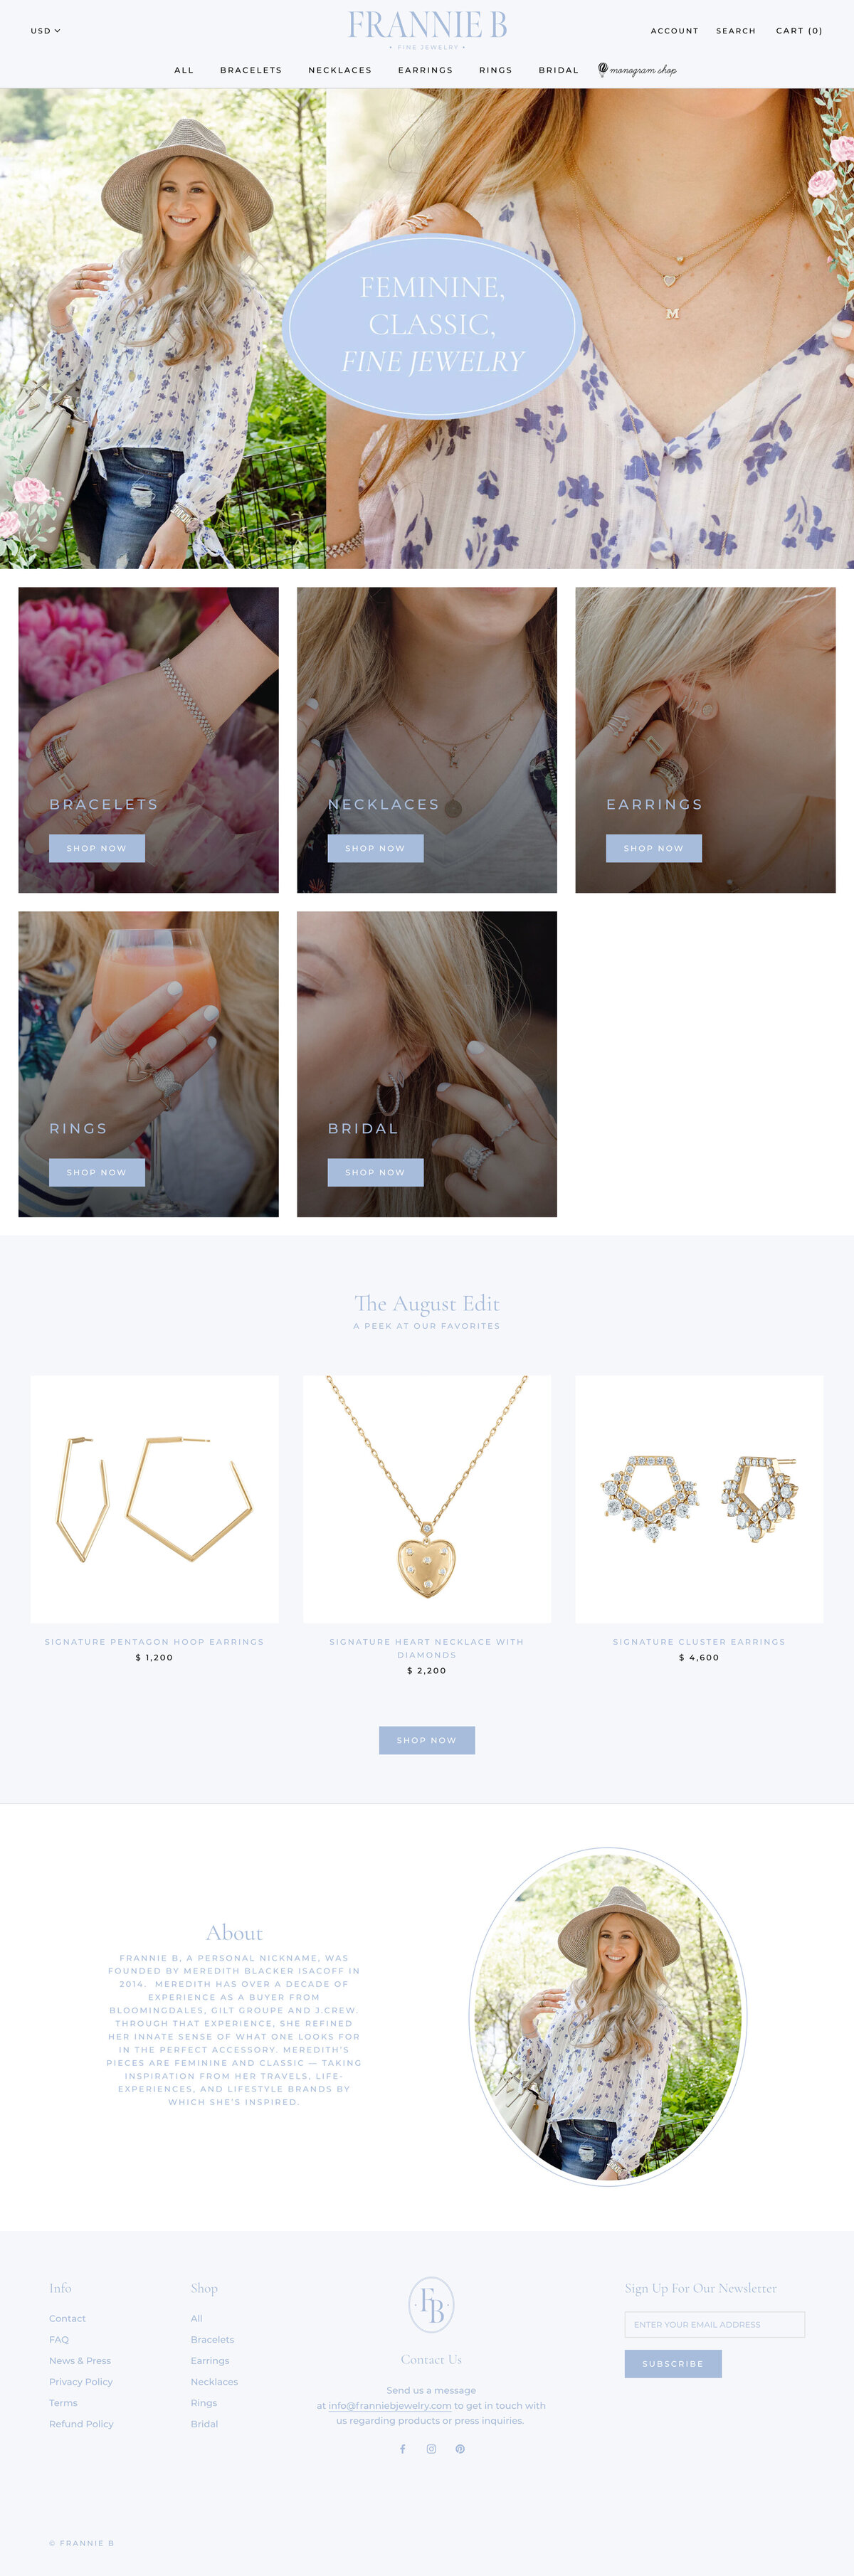 Homepage design of Frannie B. Jewelry website with blue-toned details